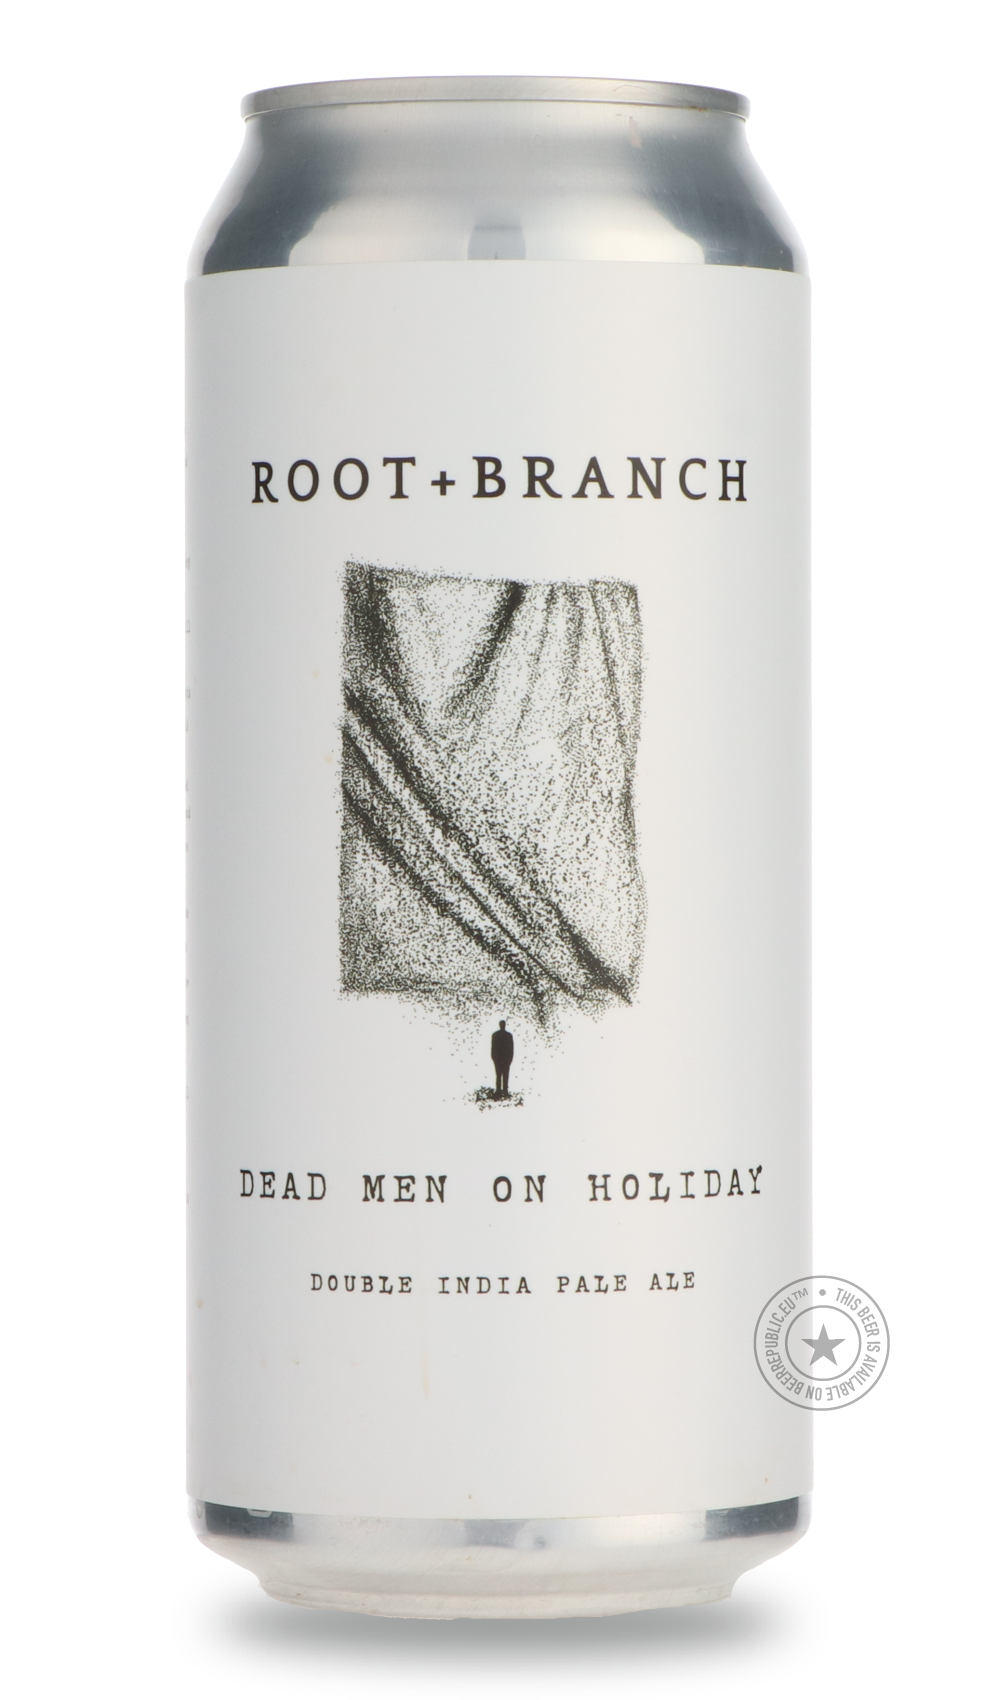 -Root + Branch- Dead Men On Holiday-IPA- Only @ Beer Republic - The best online beer store for American & Canadian craft beer - Buy beer online from the USA and Canada - Bier online kopen - Amerikaans bier kopen - Craft beer store - Craft beer kopen - Amerikanisch bier kaufen - Bier online kaufen - Acheter biere online - IPA - Stout - Porter - New England IPA - Hazy IPA - Imperial Stout - Barrel Aged - Barrel Aged Imperial Stout - Brown - Dark beer - Blond - Blonde - Pilsner - Lager - Wheat - Weizen - Amber